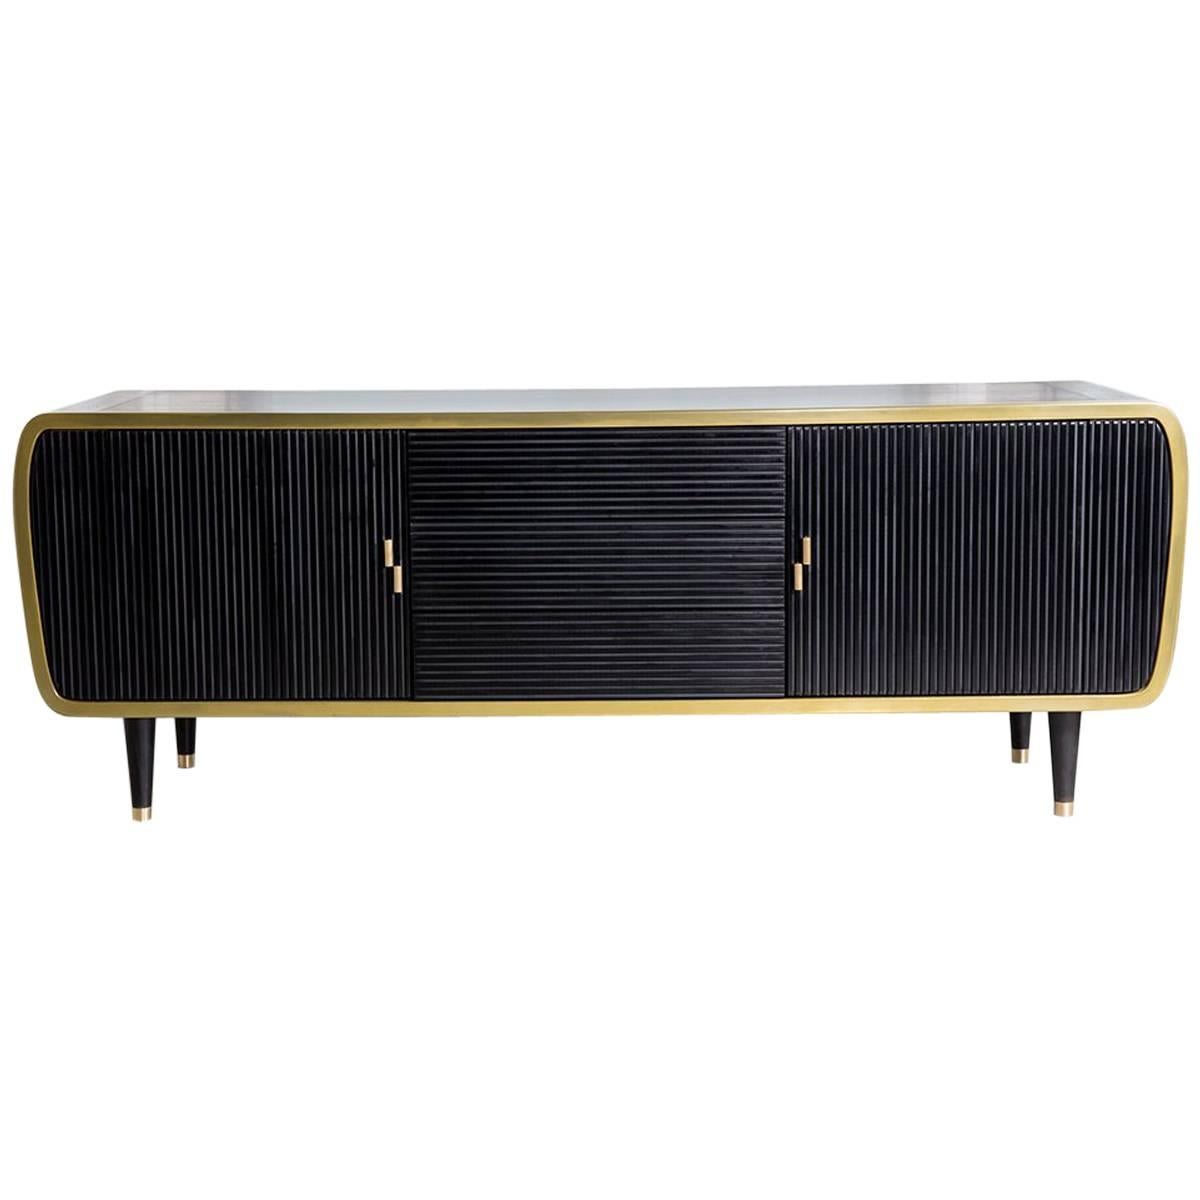 Iris Blackened Oak Limited Edition Credenza by Felice James, 2017 For Sale